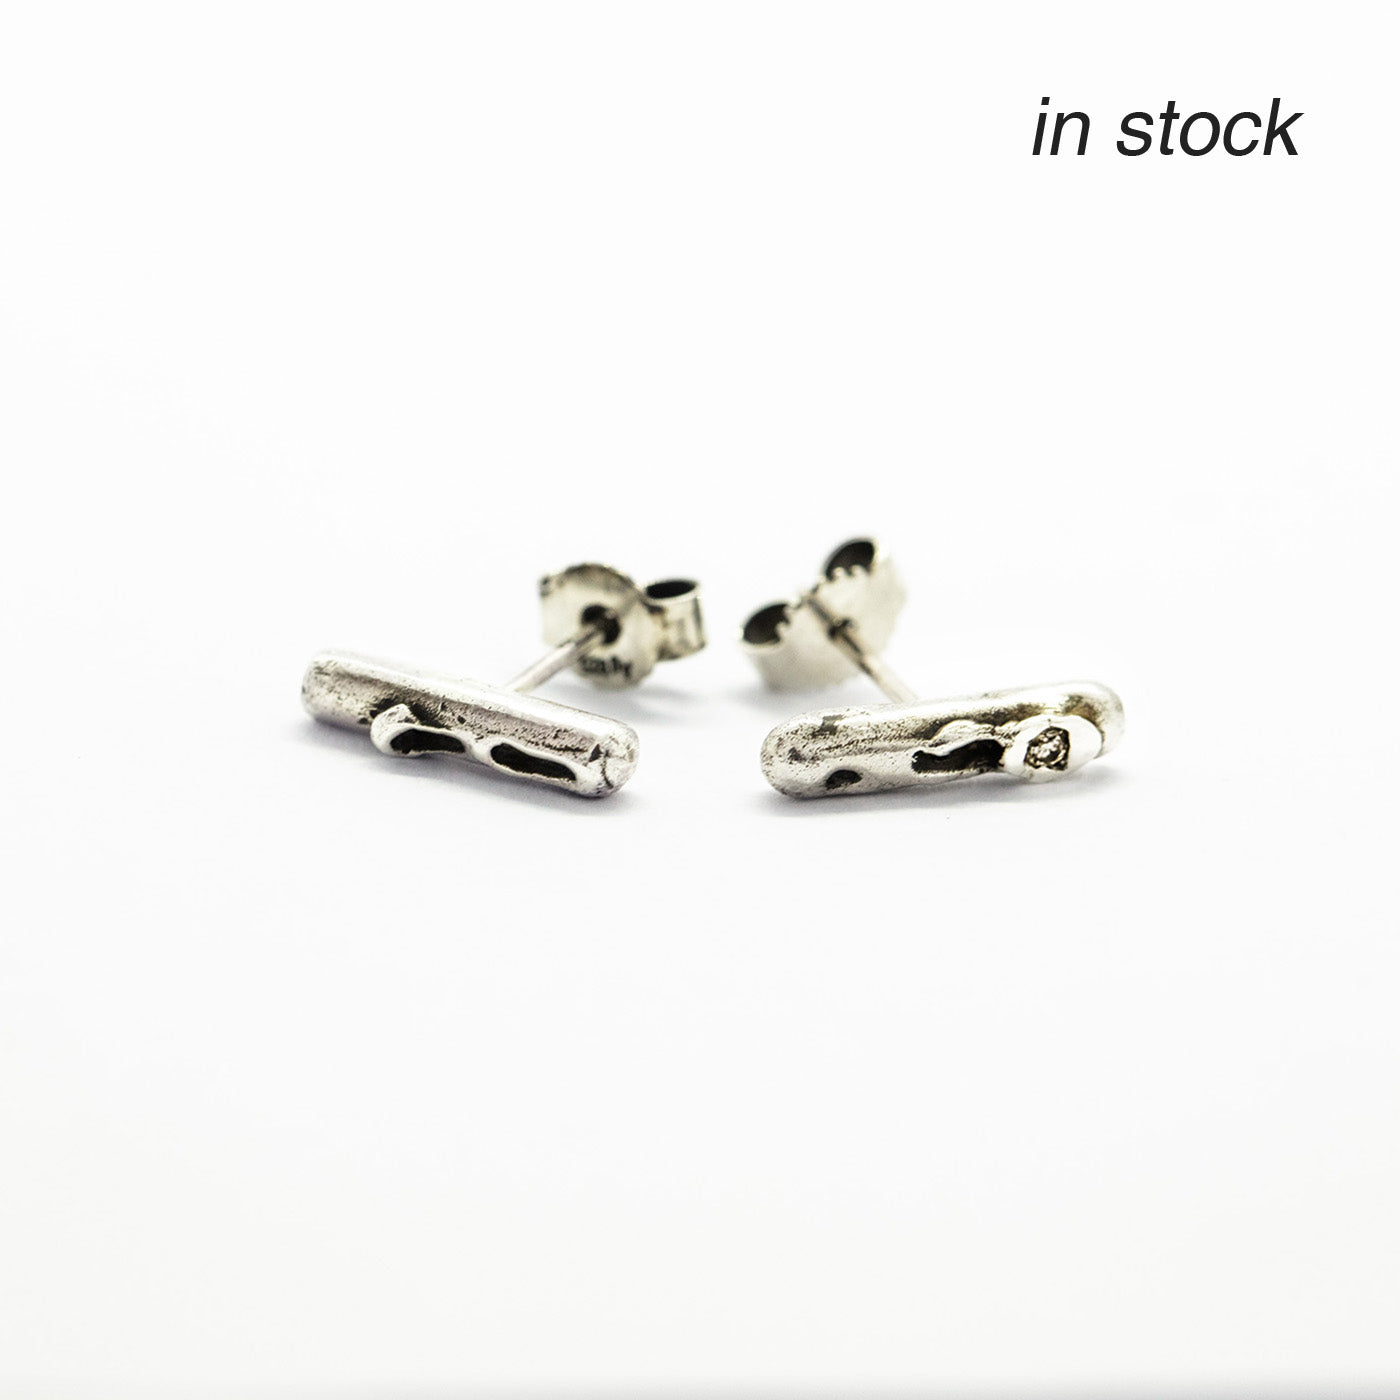 earrings cenote bar silver champagne diamond product view innan jewellery independent atelier berlin in stock